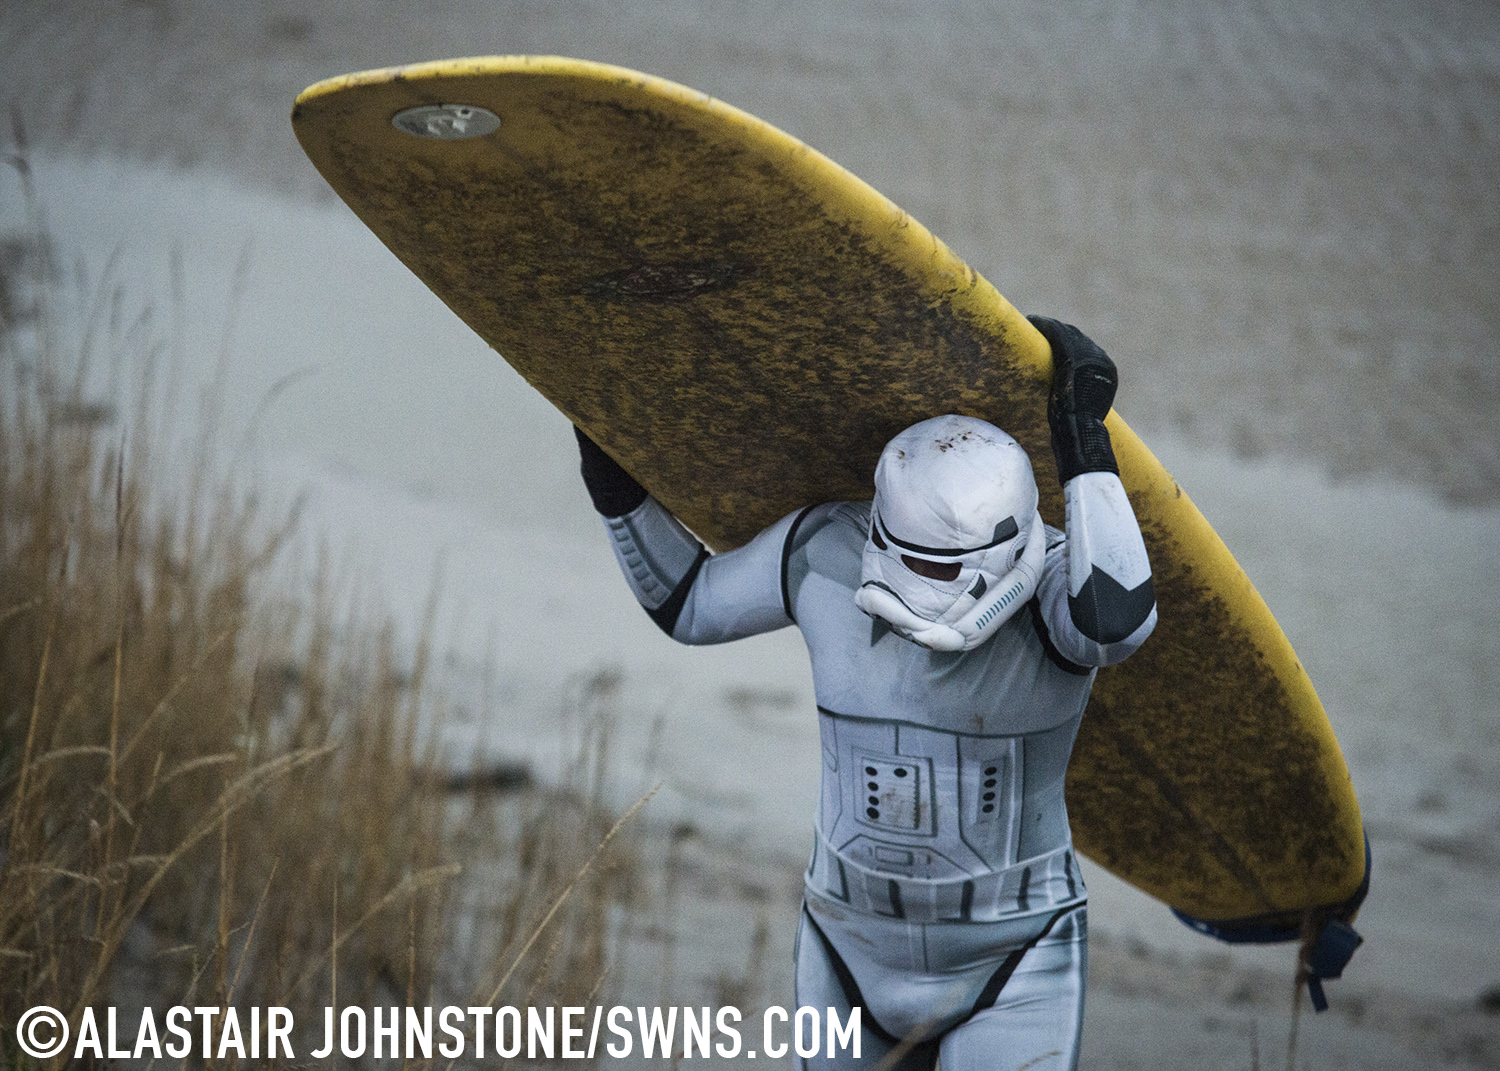 A surfer dressed as a Star Wars Stormtrooper after surfing one section of the Severn Bore on the River Severn in Gloucestershire, England. November 27 2015.  See SWNS story SWTROOPER: There was an unworldly sight in the Forest of Dean this morning (Friday 27th November) when a trio of Star Wars Stormtroopers surfed the spectacular Severn Bore. Key scenes from the upcoming Star Wars episode VII were filmed in nearby Puzzlewood and can be seen several times in the trailer.  Swapping the Death Star for surfboards, the elite soldiers of the Galactic Empire took to the waves to mark the release of the highly anticipated new Star Wars film and a new TV & Movie Trail. The Forest of Dean’s atmospheric and picturesque location provided a natural stage for the film, which director J.J Abrams referenced in a thank you letter to all of the movie's cast and crew.